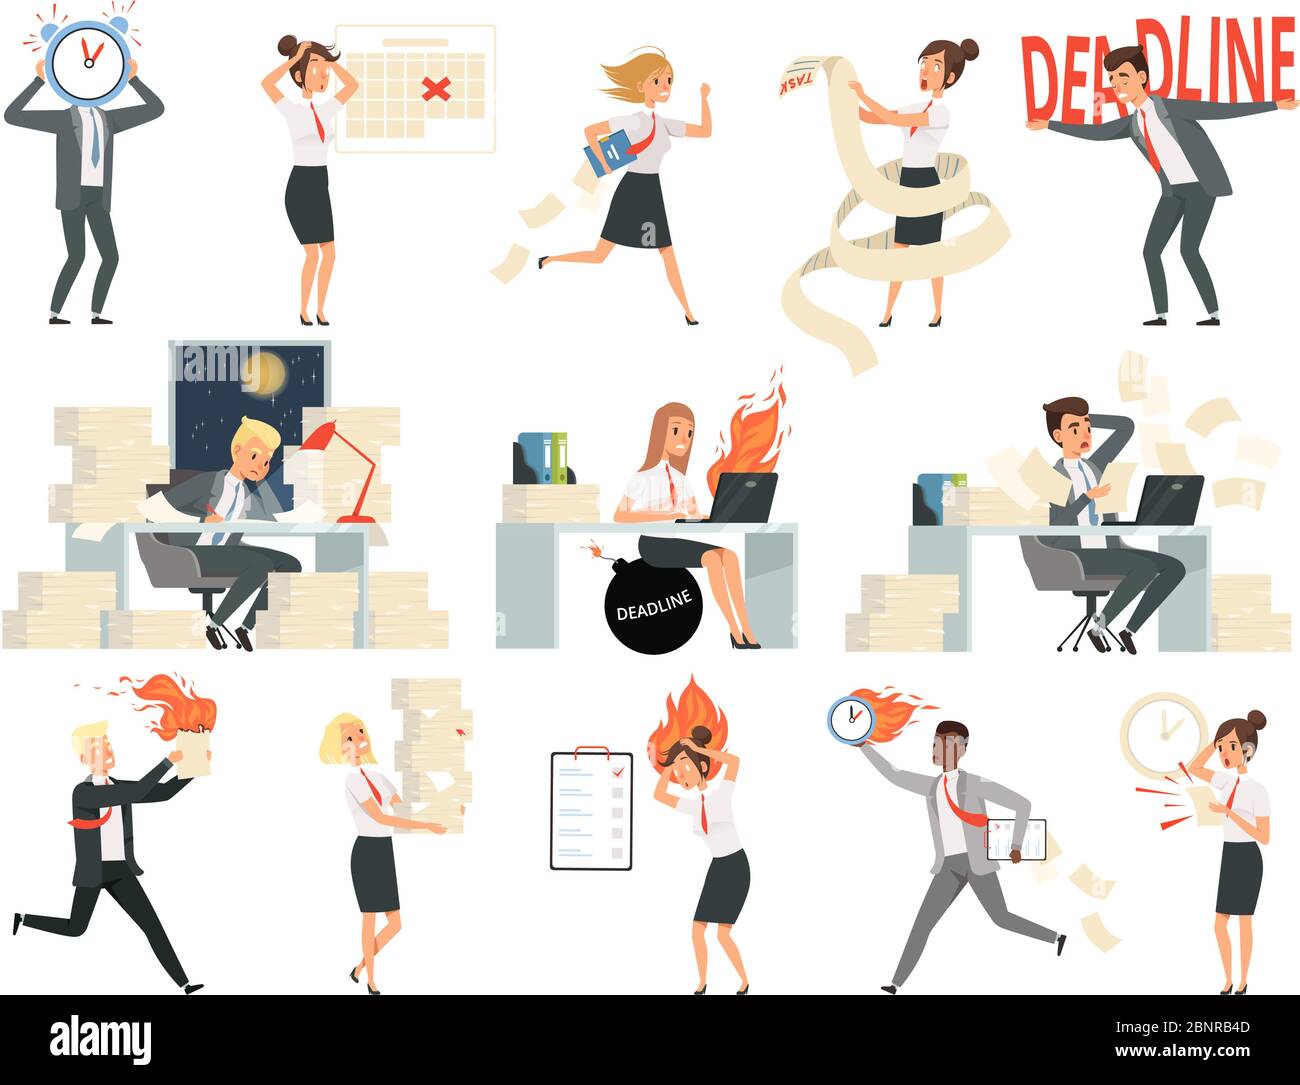 Deadline characters. Business overworked people directors managers stressed and rushing danger workspace vector people isolated Stock Vector